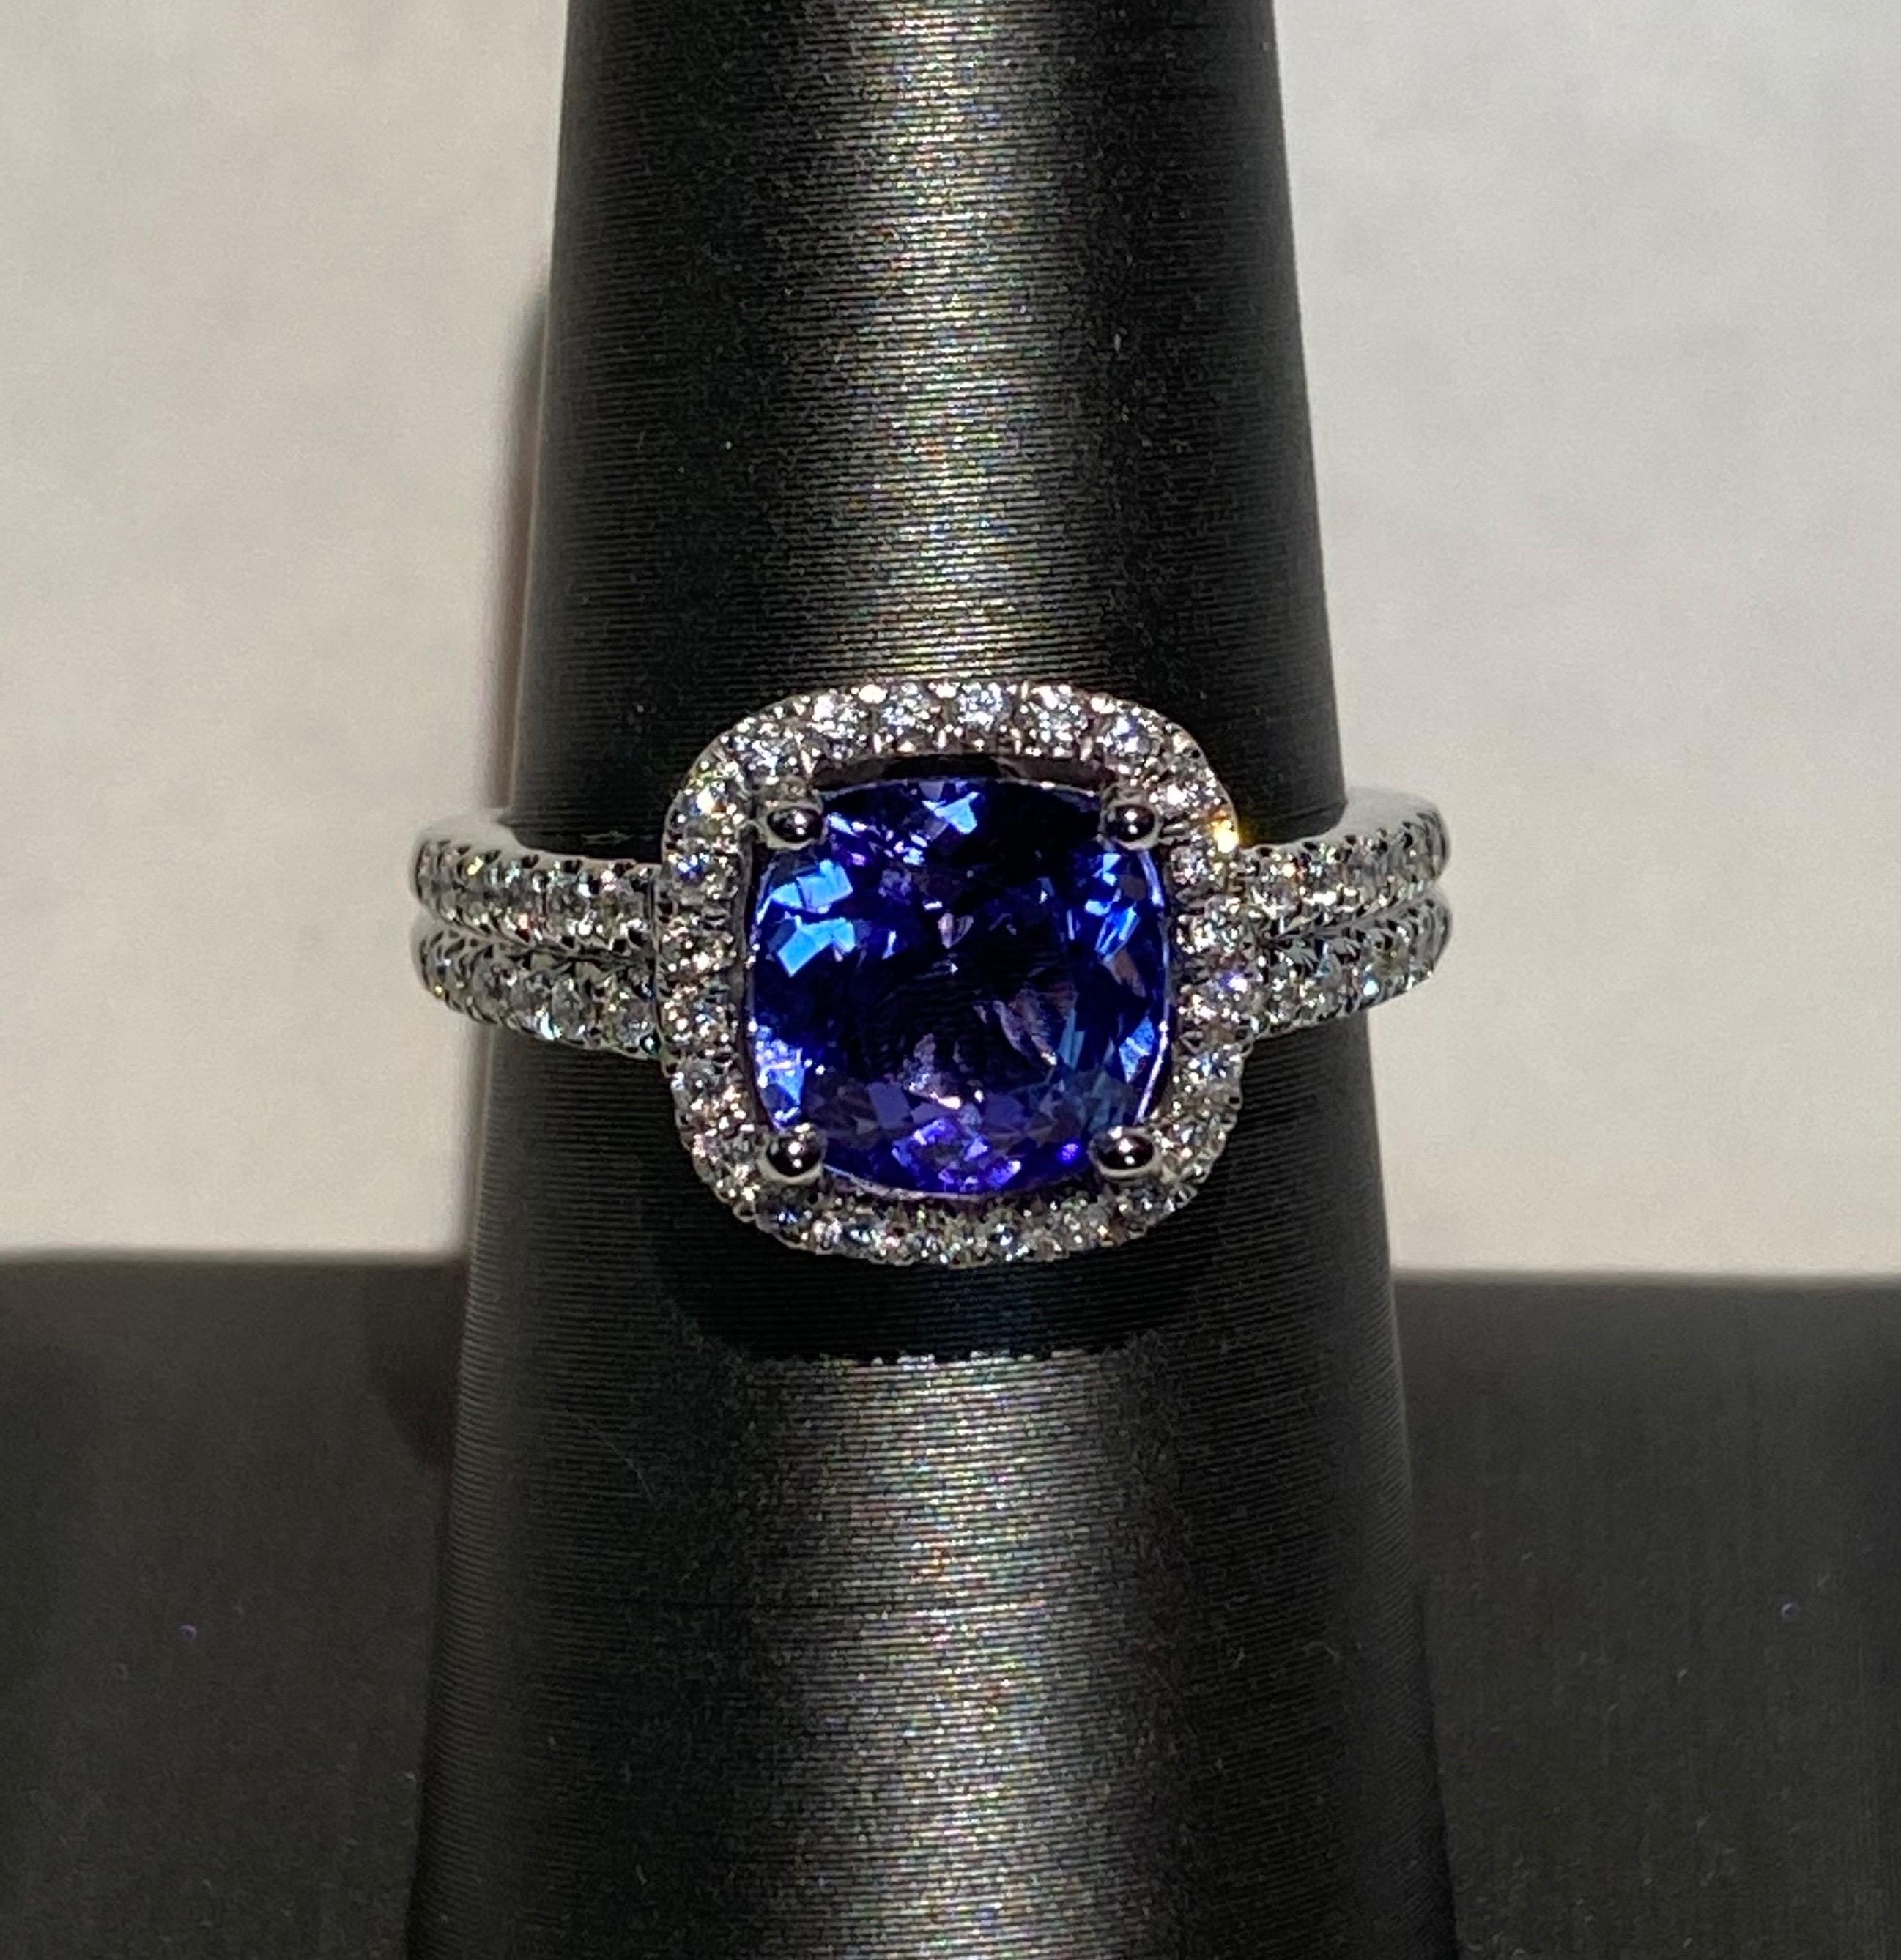 Cushion cut tanzanite is surrounded by halo of white diamond. It has a band of double row pave set diamond. Crafted with skilled hands and set in white gold. Very elegant.
Tanzanite: 2.25ct
White Diamond: 0.33ct
White Gold: 14K
Size: 7 (resizeable)